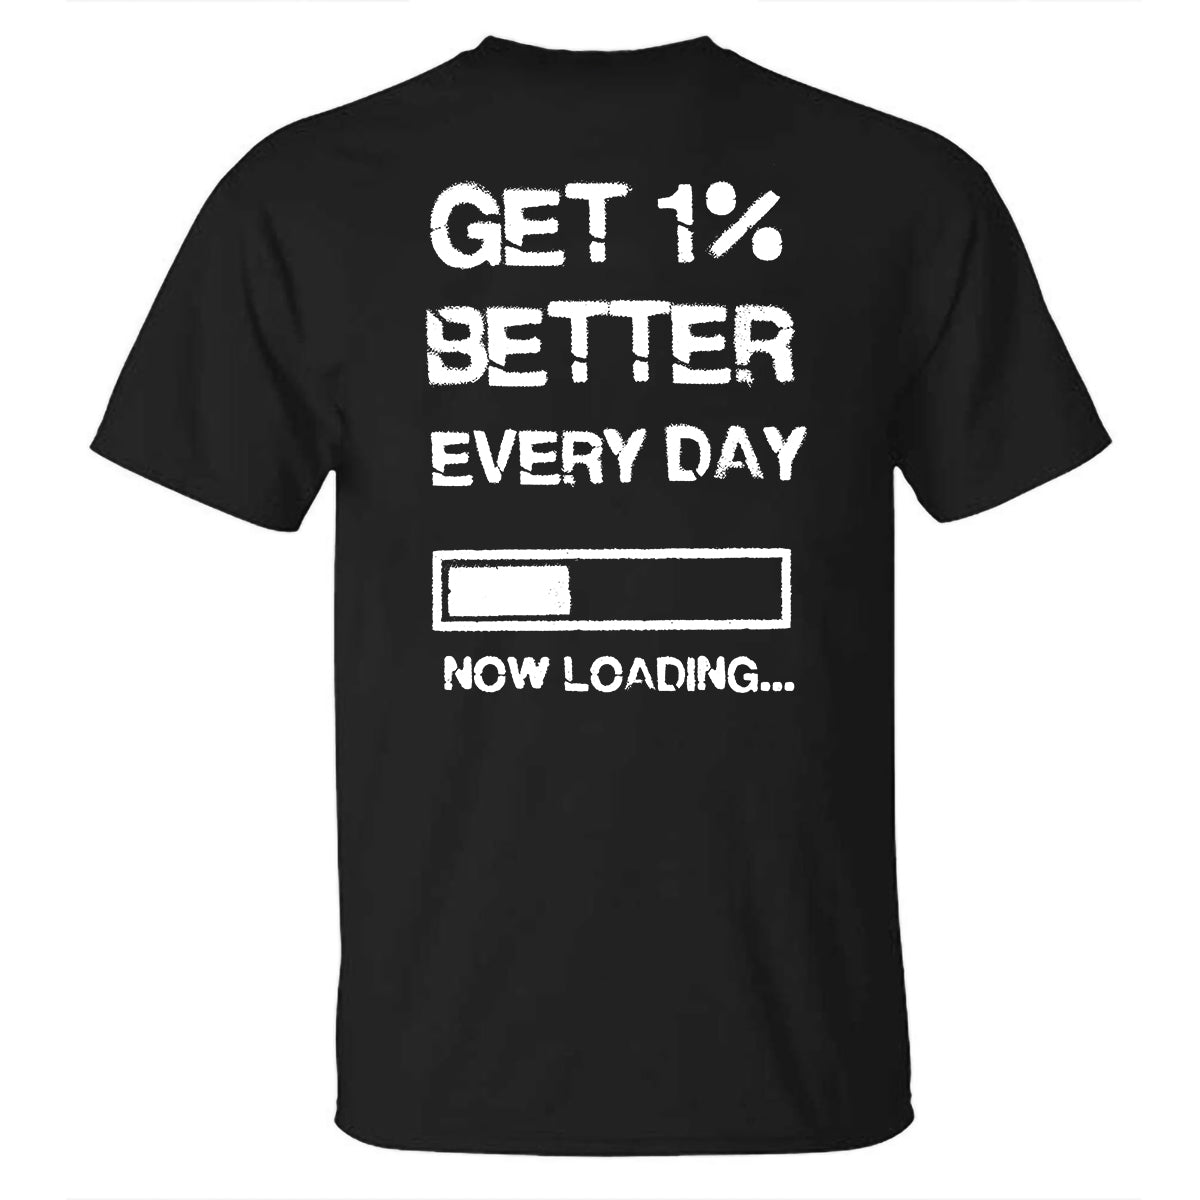 GrootWear Get 1% Better Every Day Printed T-shirt